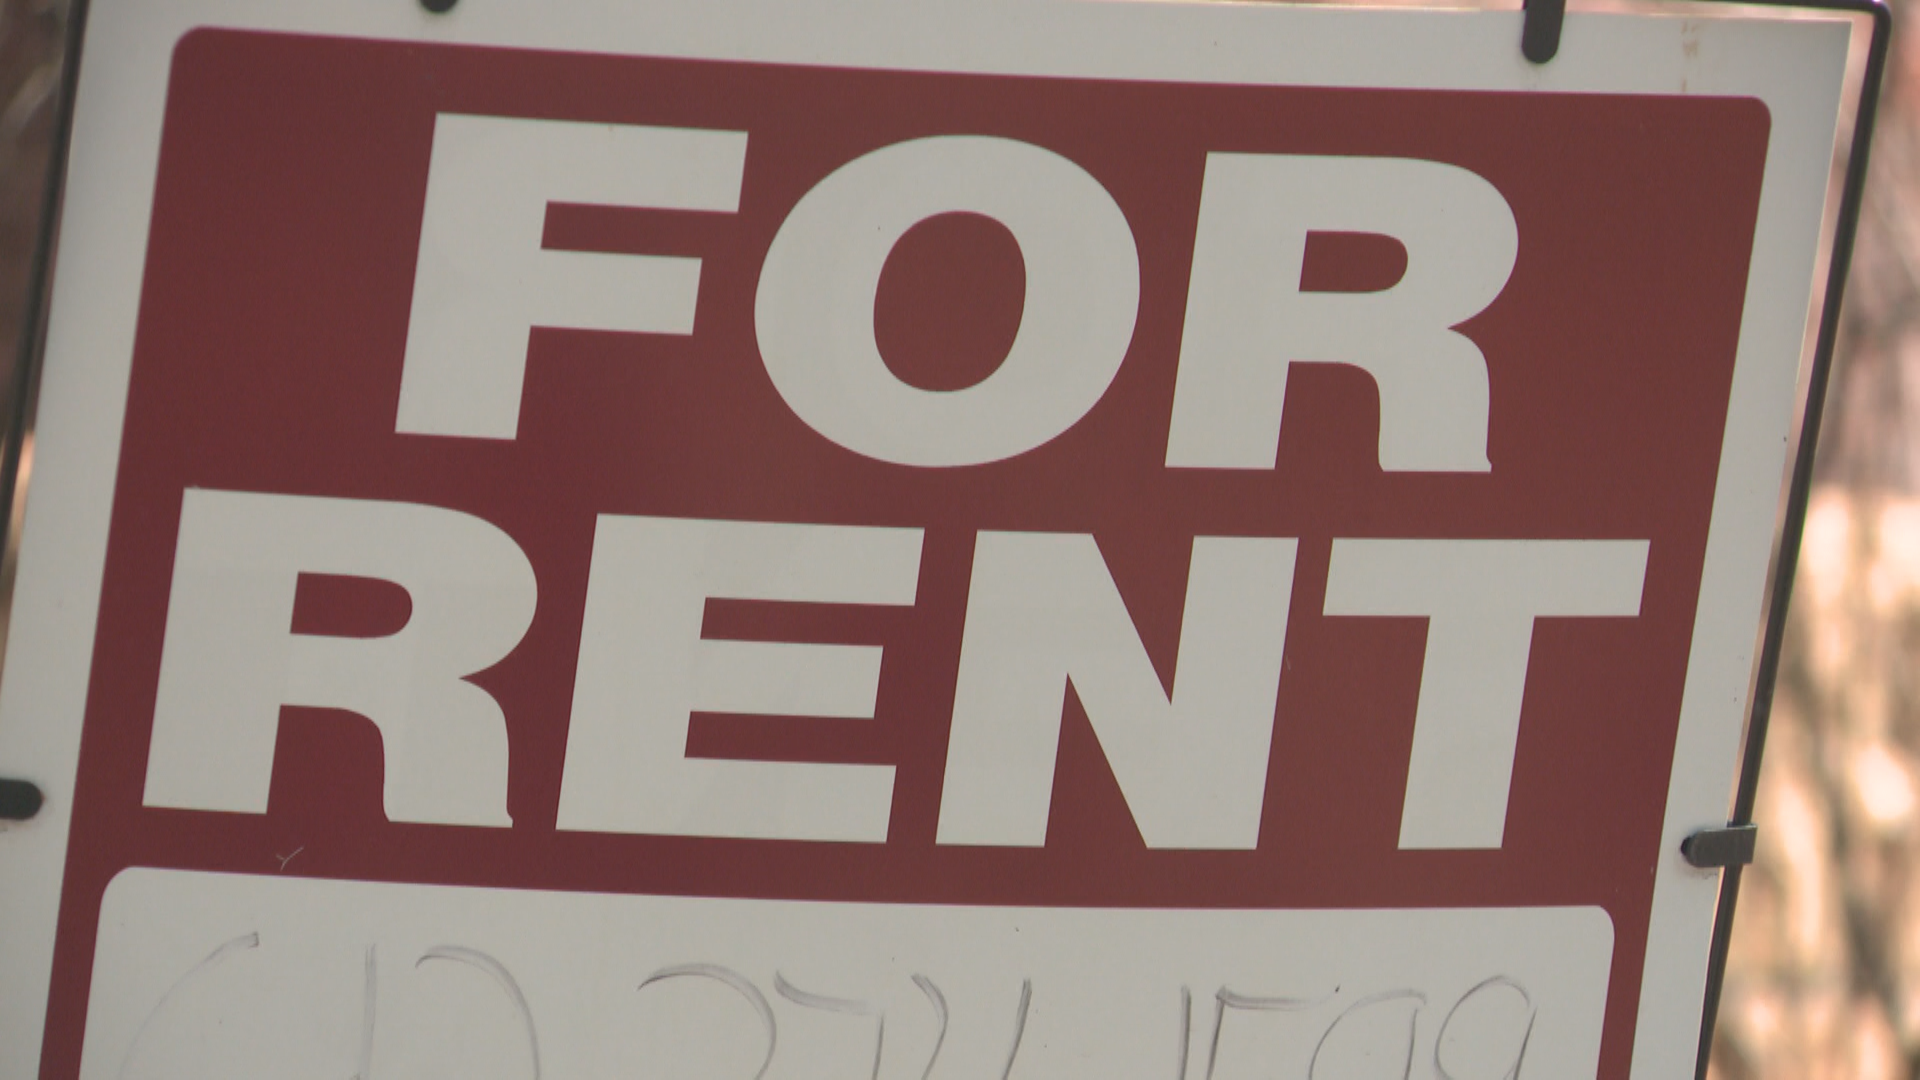 Rental demand is roaring, leading to higher prices for many renters.